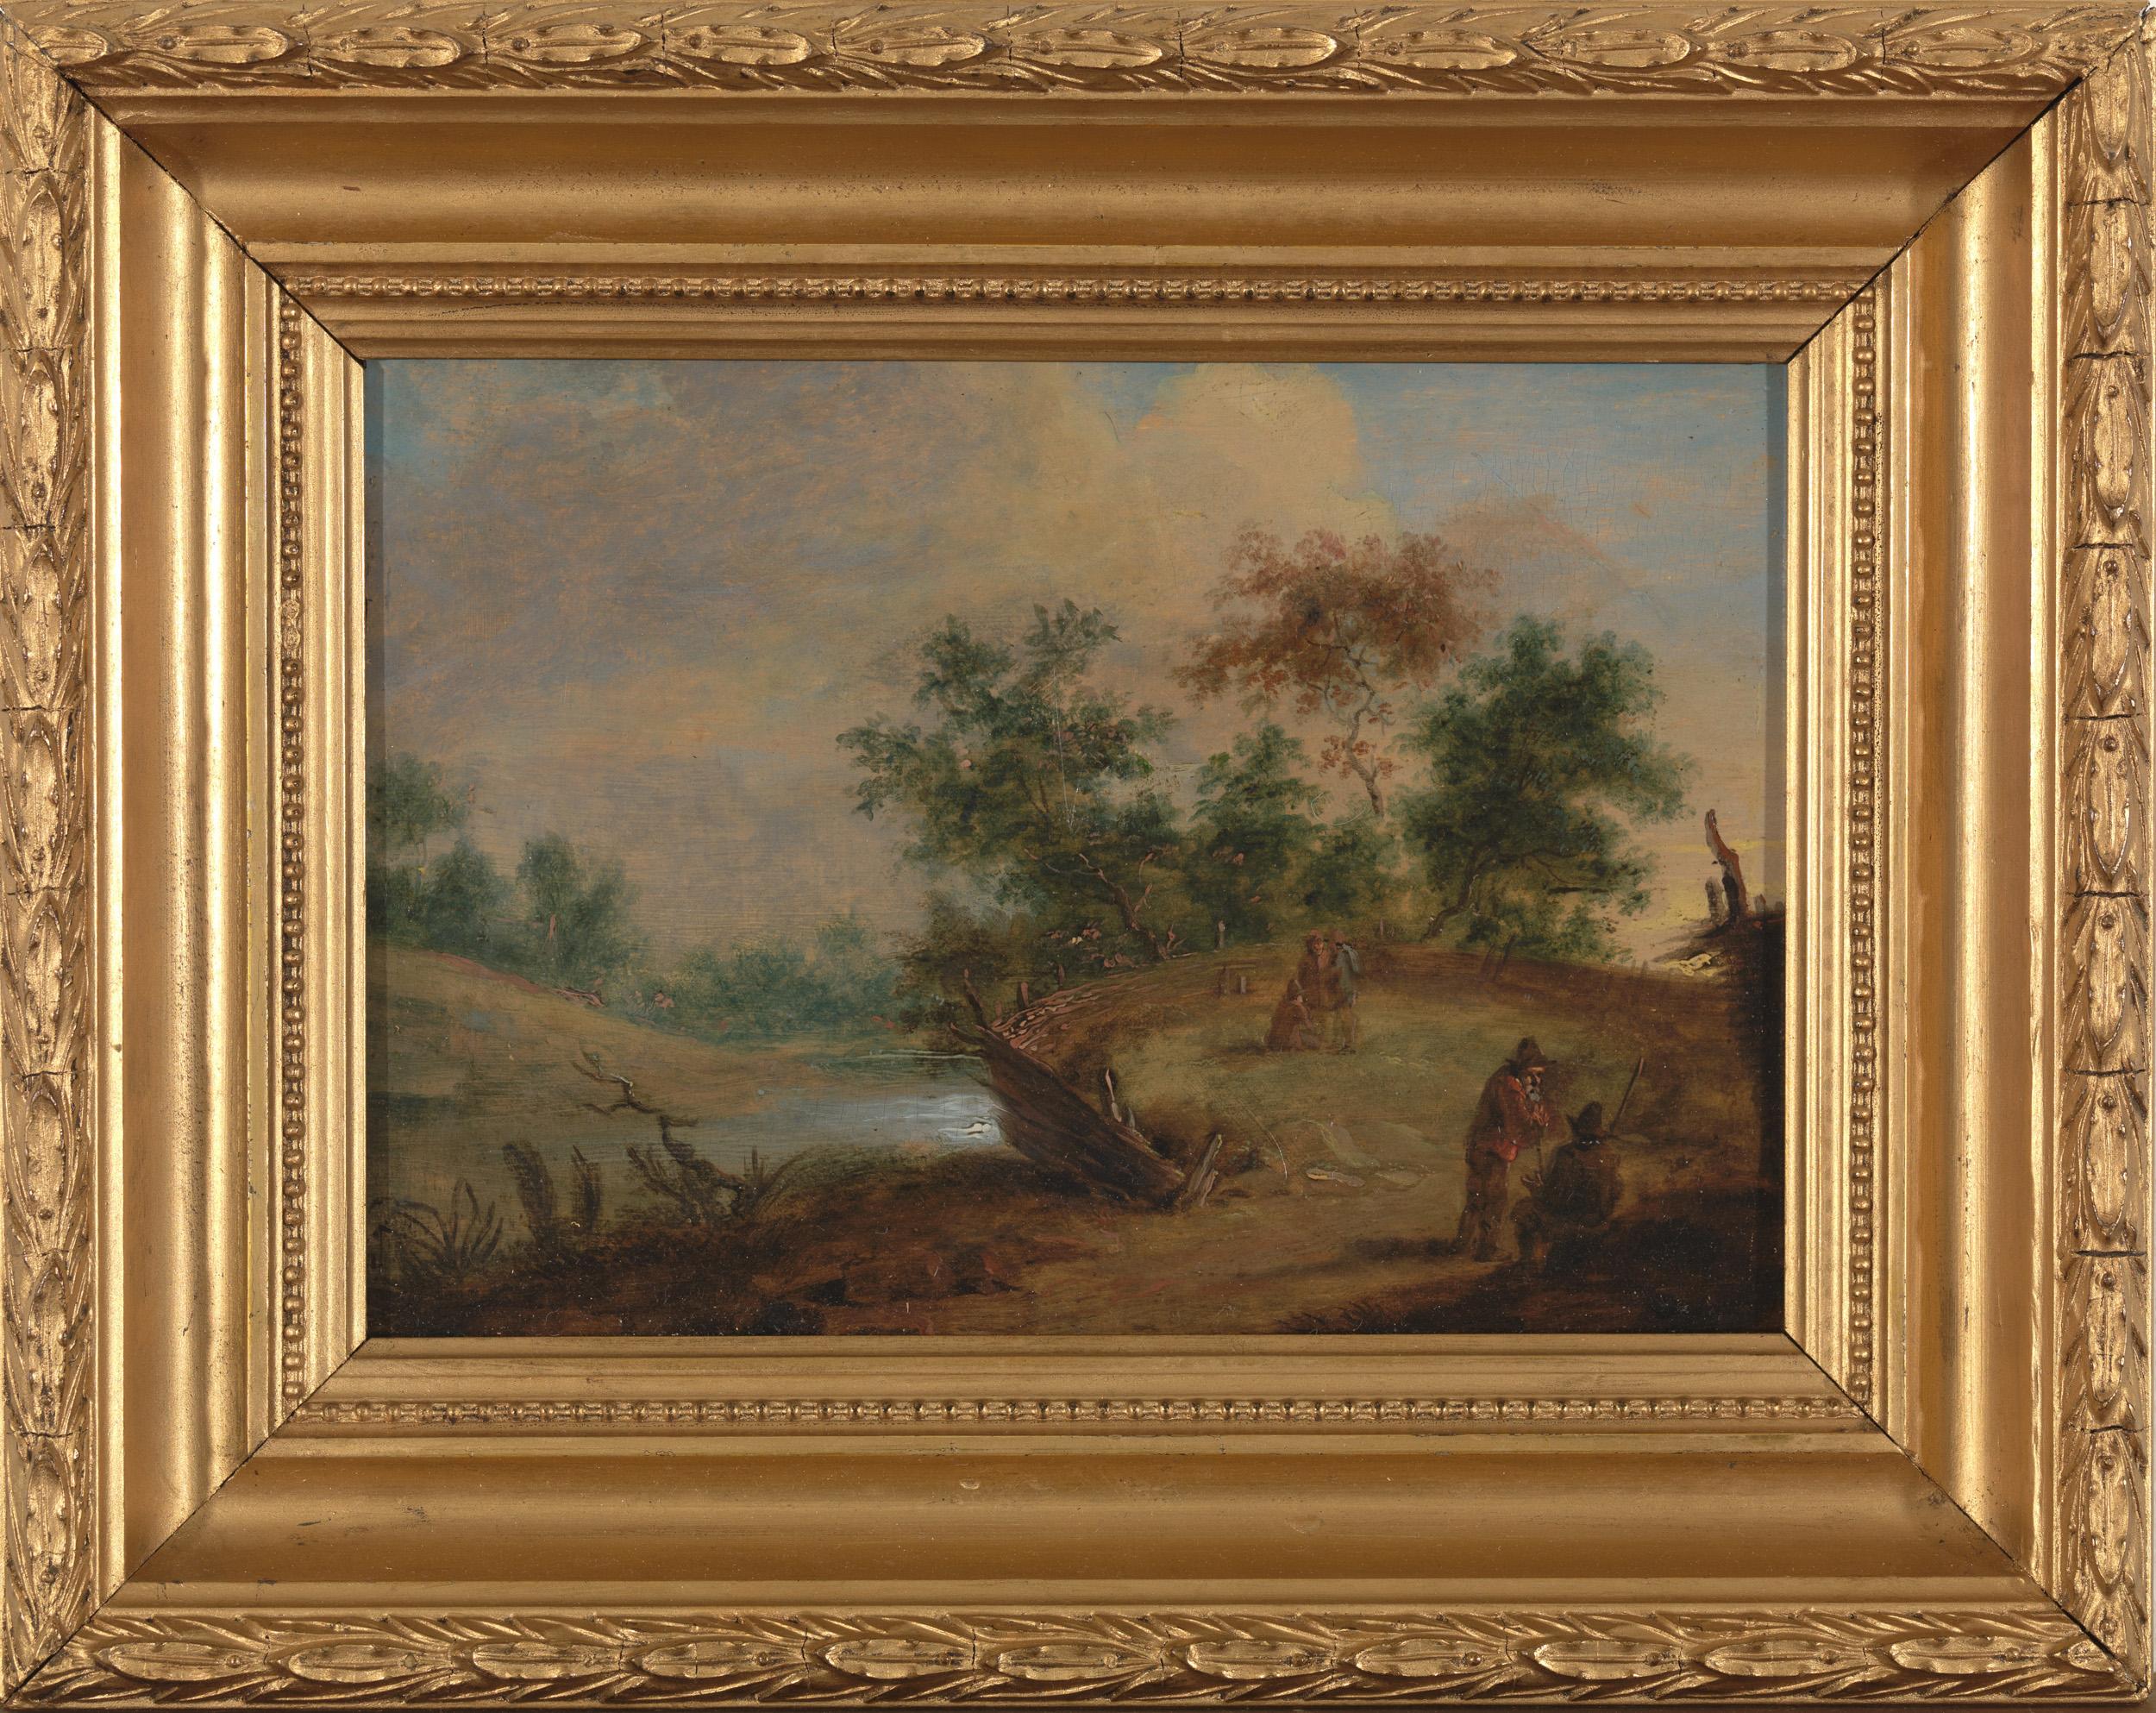 17th C, Landscape, Flemish School, Countryside with Figures at a Small River - Painting by Unknown